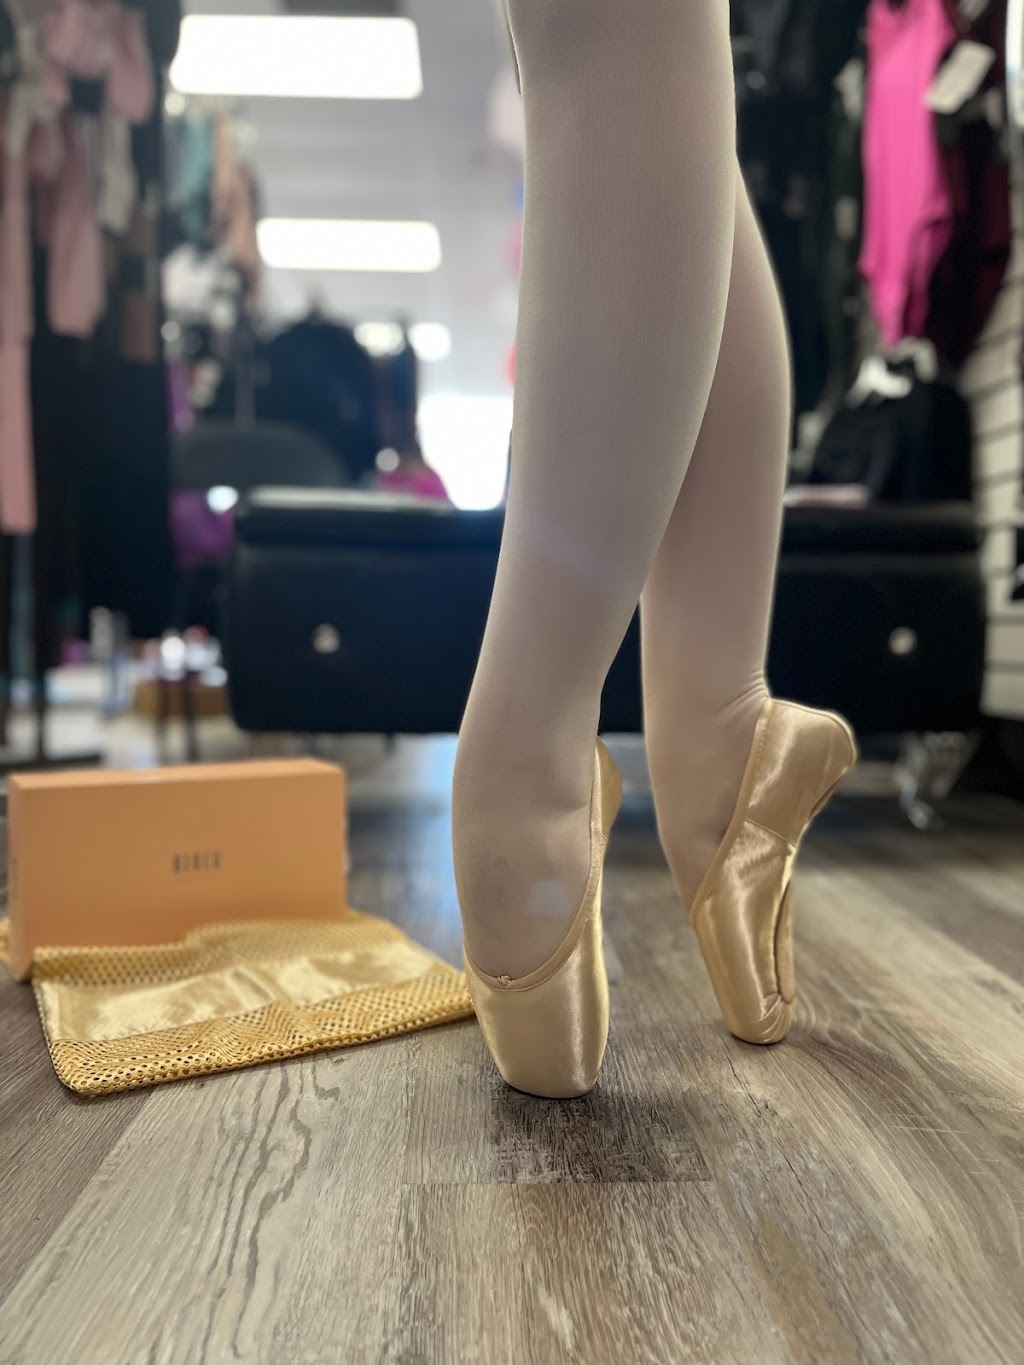 Step In Time Dancewear | 10 Farber Dr, Bellport, NY 11713 | Phone: (631) 289-7742